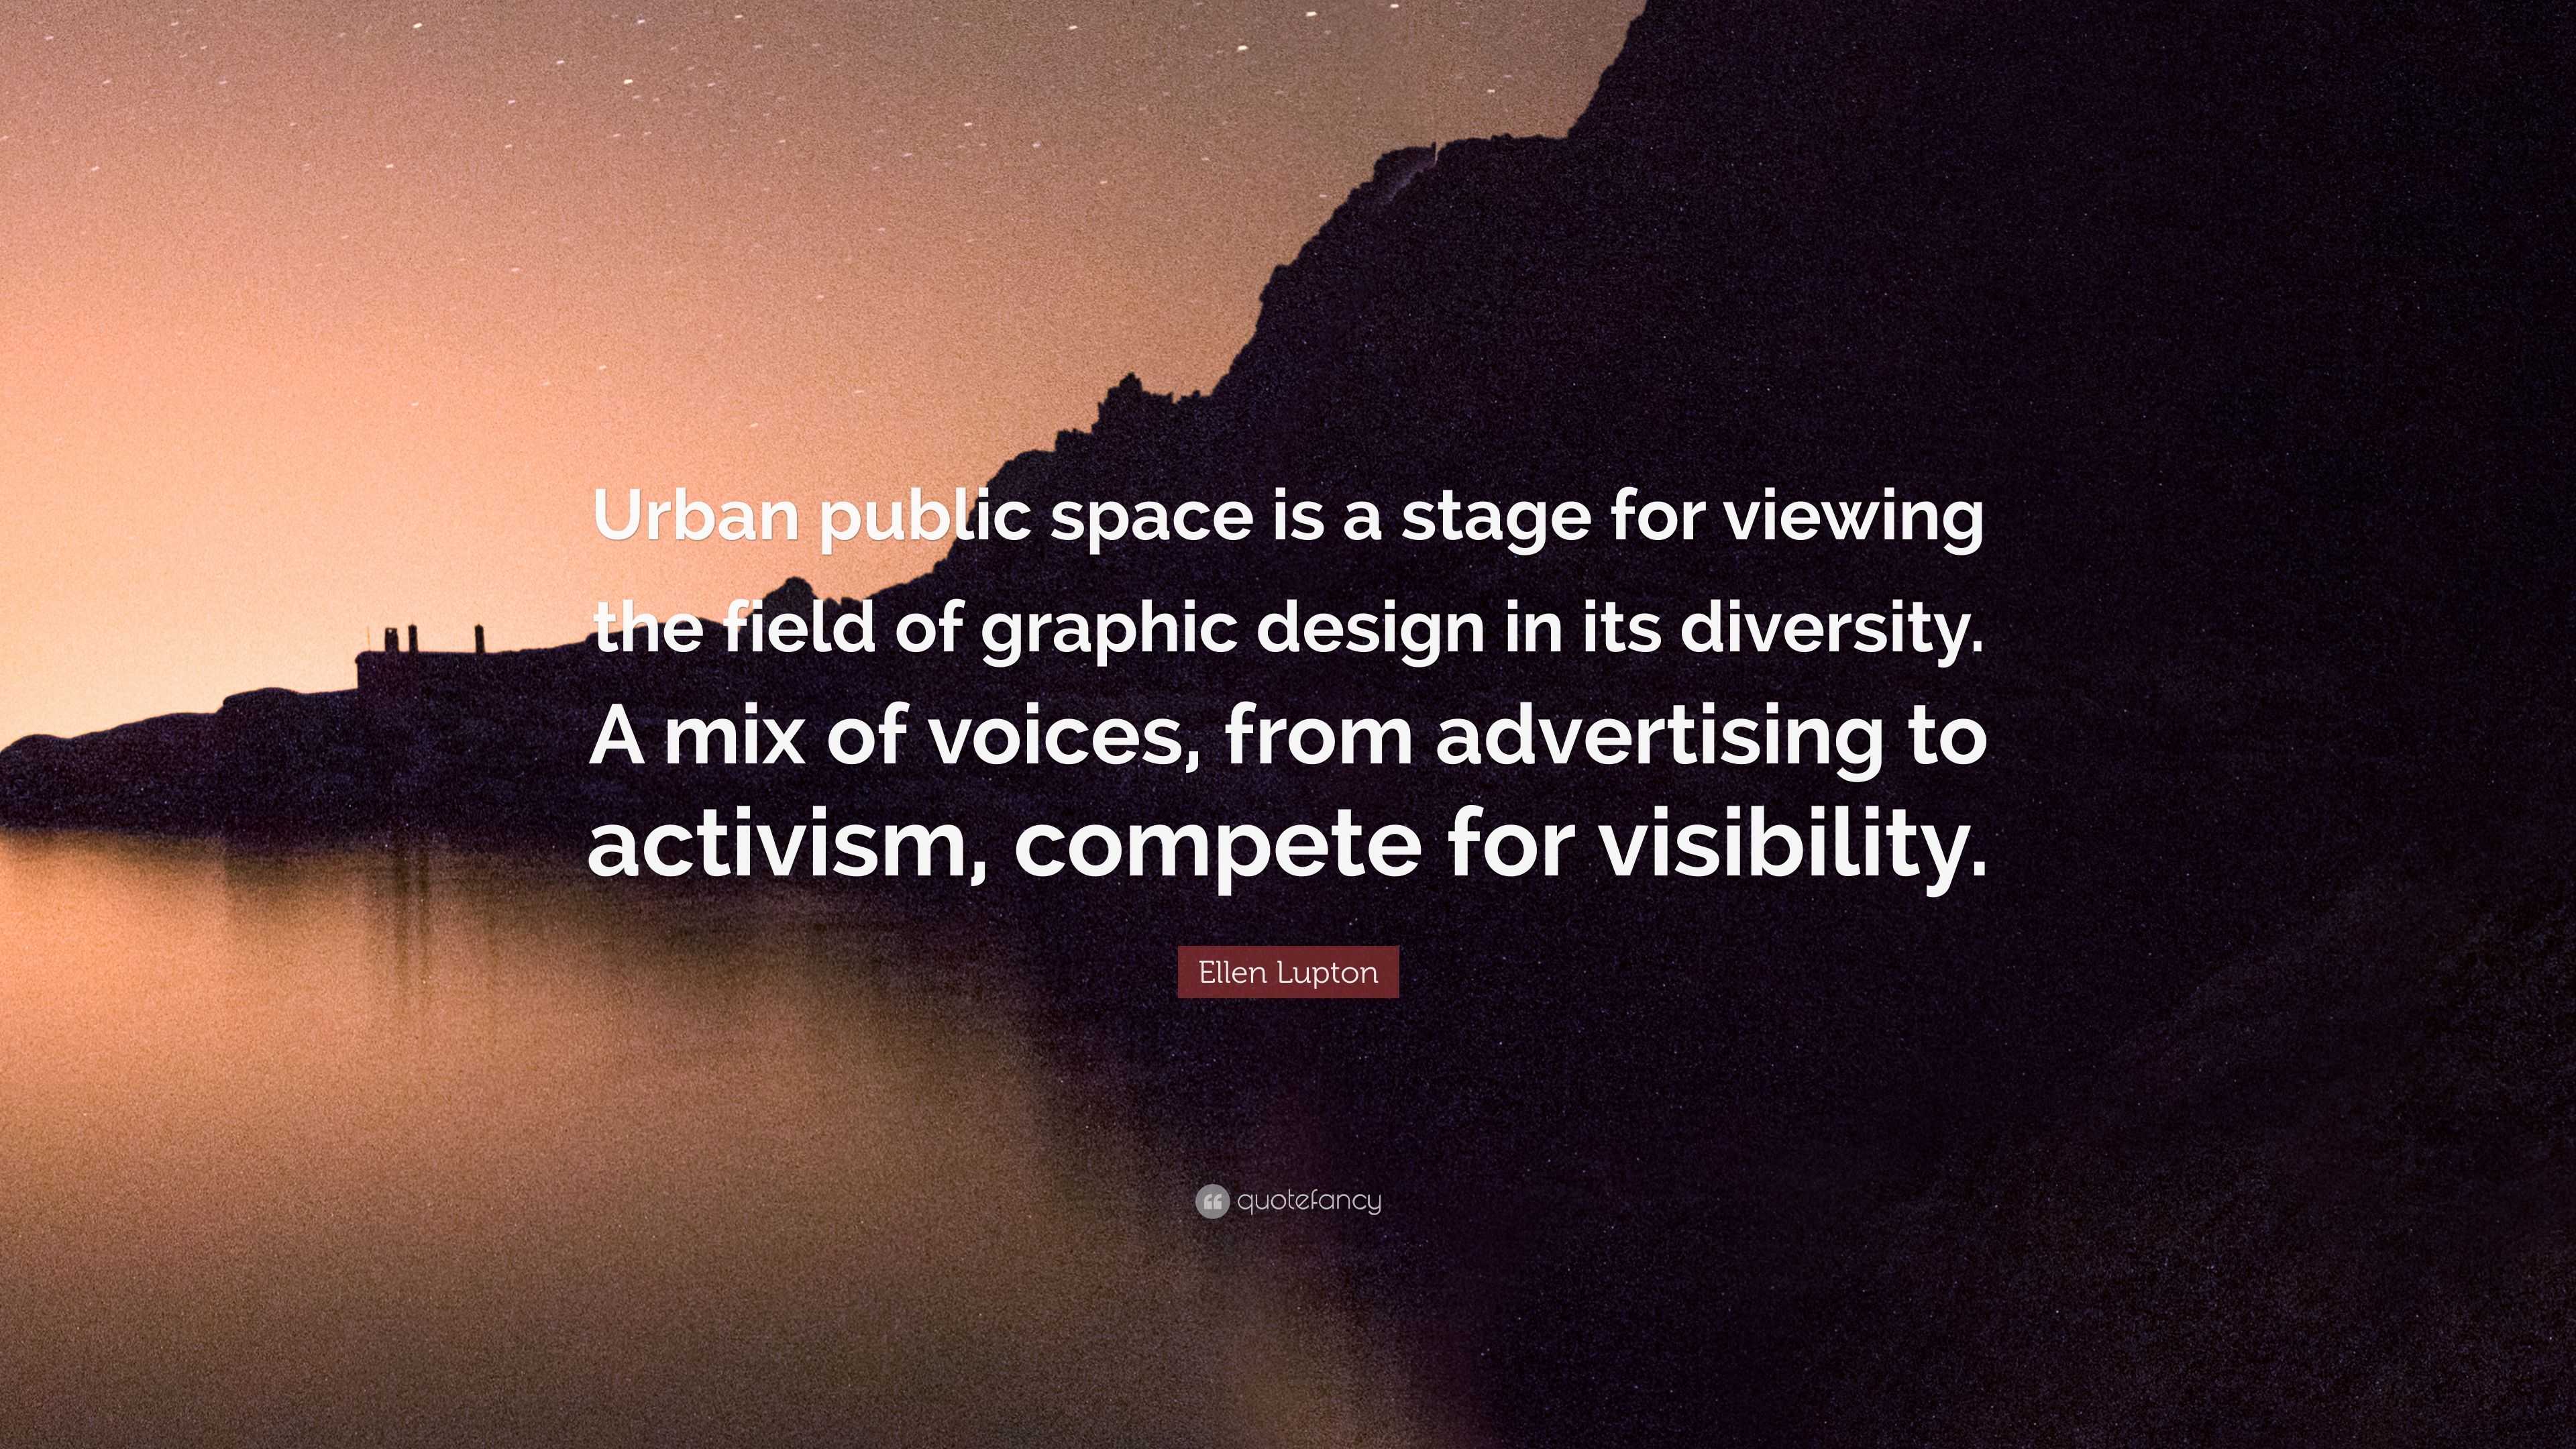 Ellen Lupton Quote: “Urban public space is a stage for viewing the